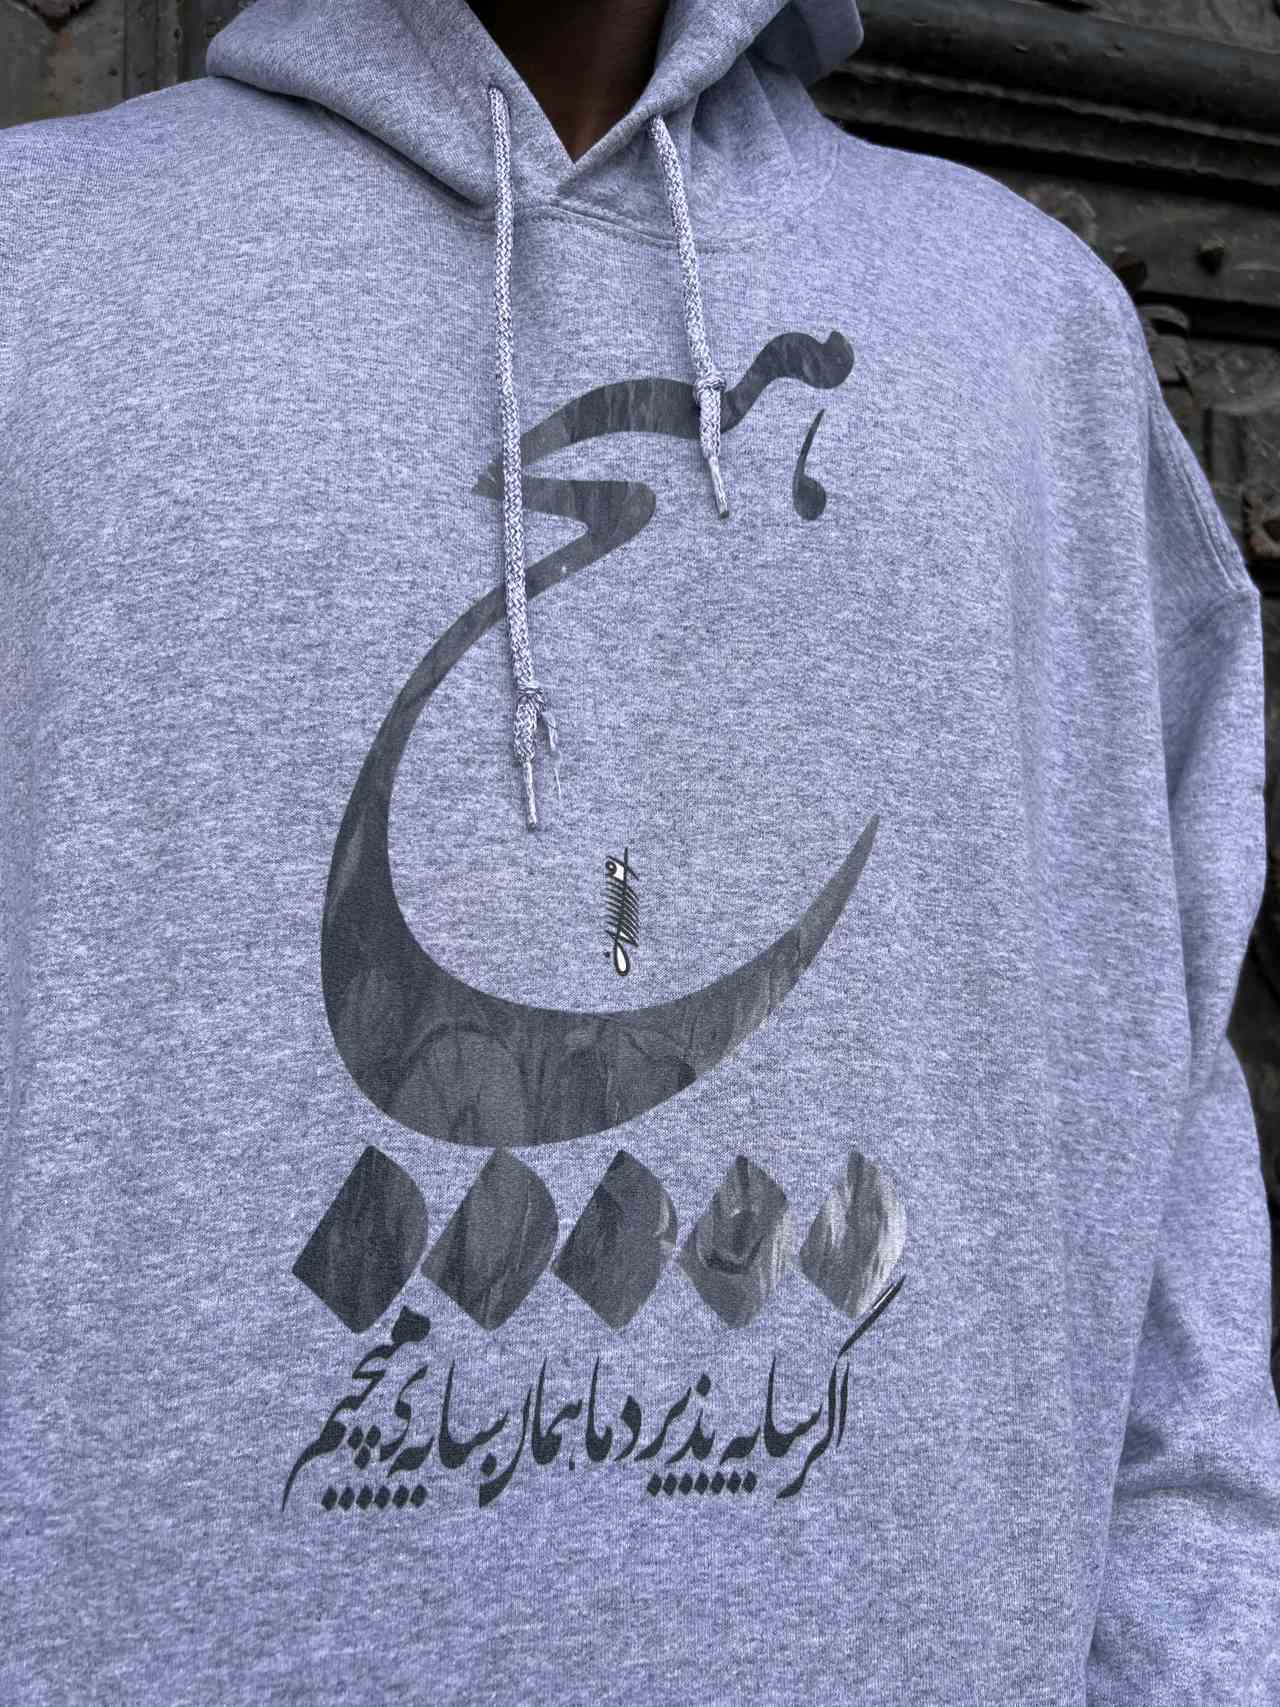 Luxurious hoodie adorned with Persian script, inviting warmth and comfort.